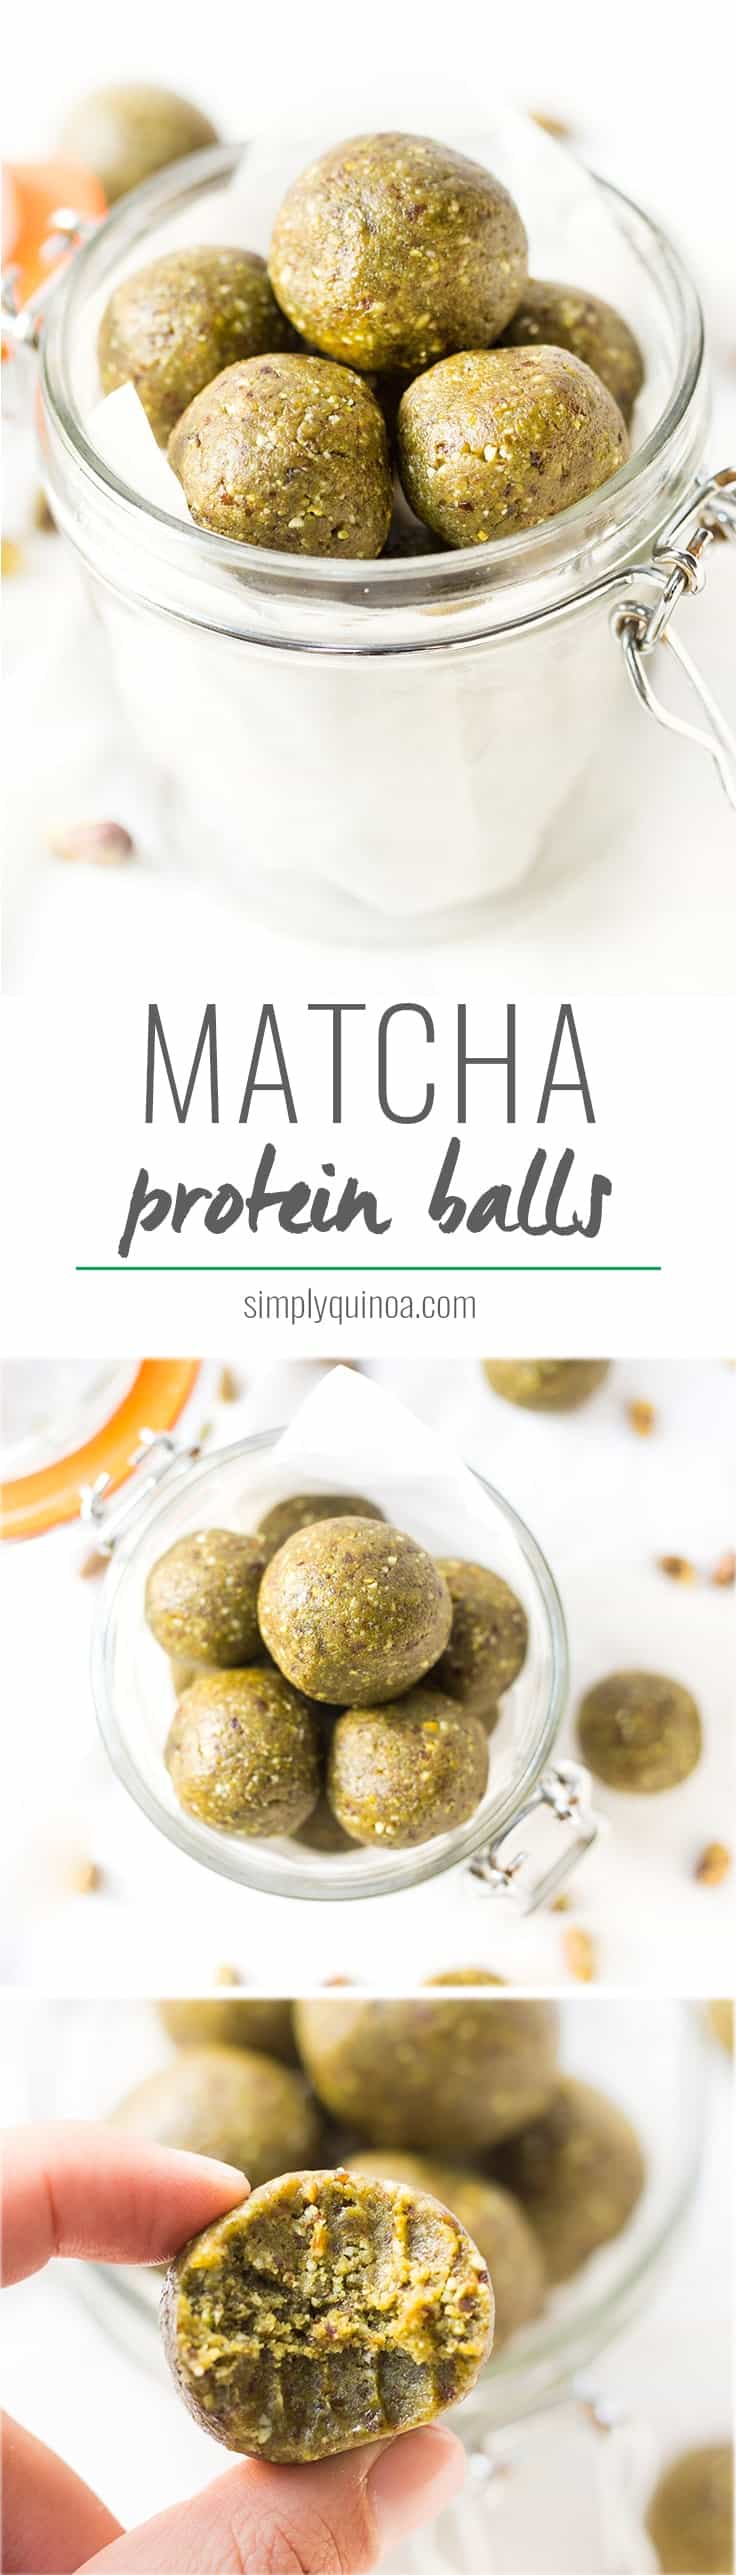 A fun way to use matcha, these matcha protein balls are a cinch to make! They're packed with protein, healthy fats and make the perfect on-the-go snack!